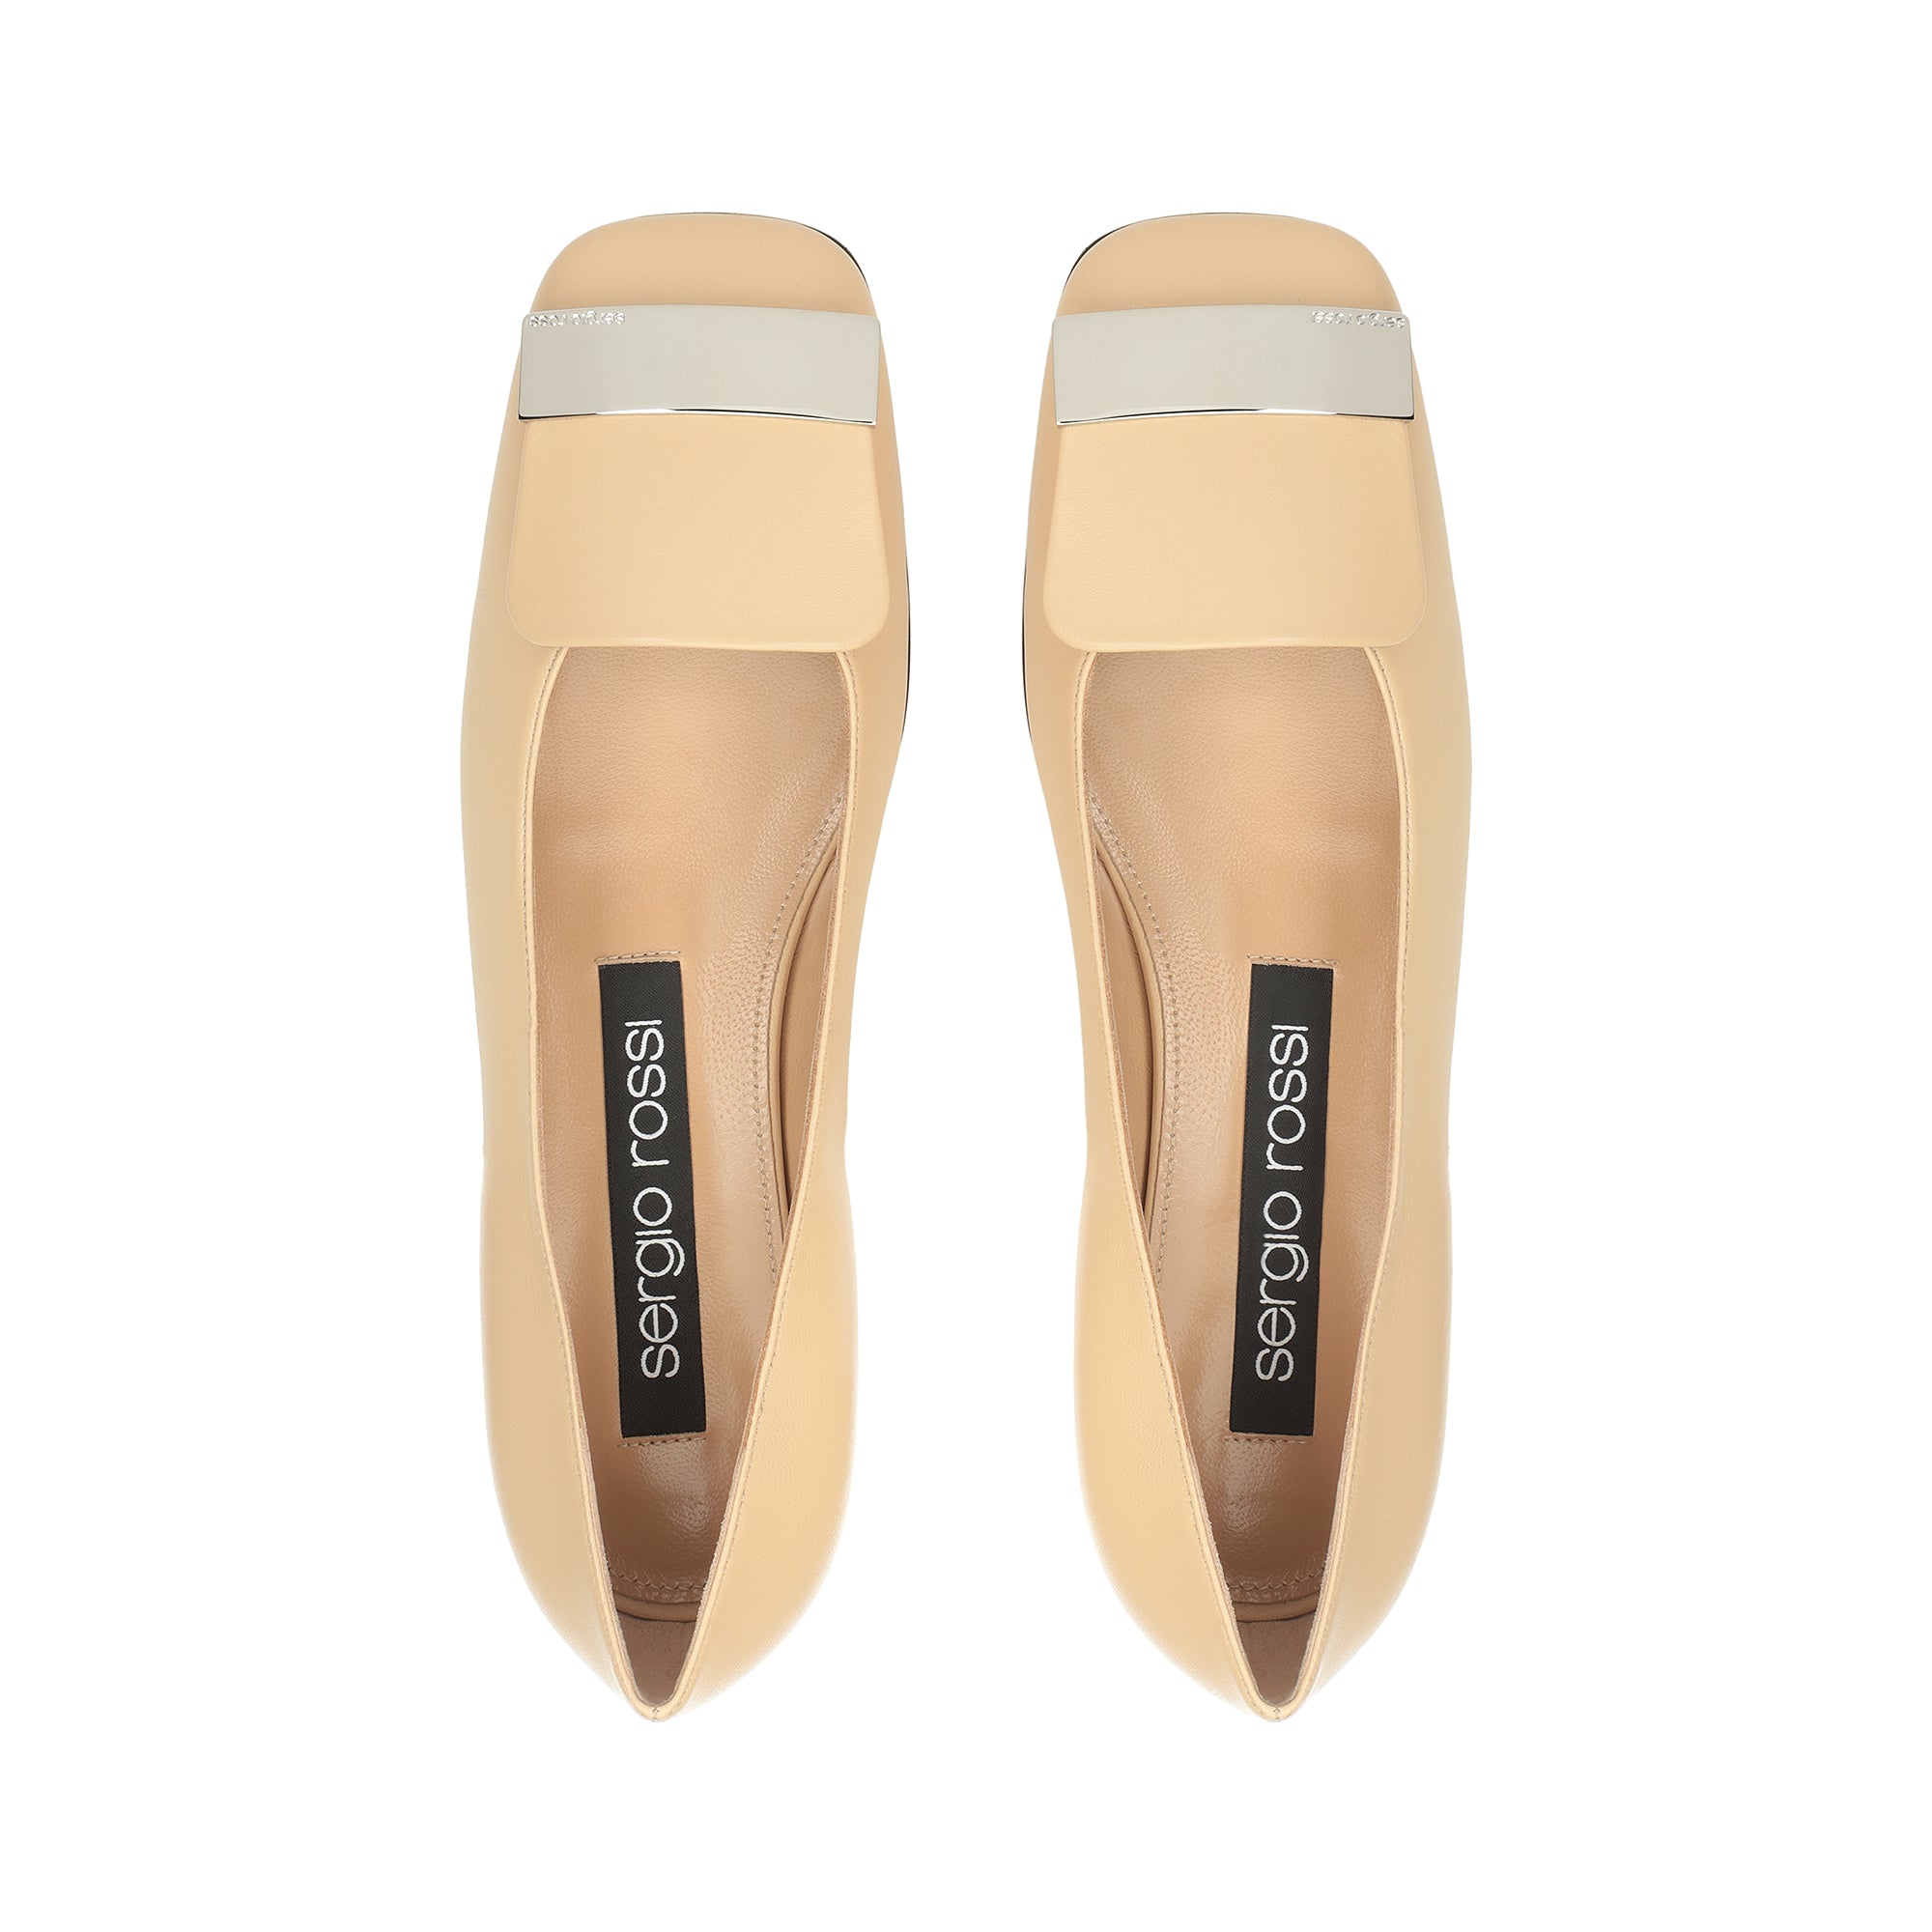 Sr1 ballerinas with tongue - Soft Skin